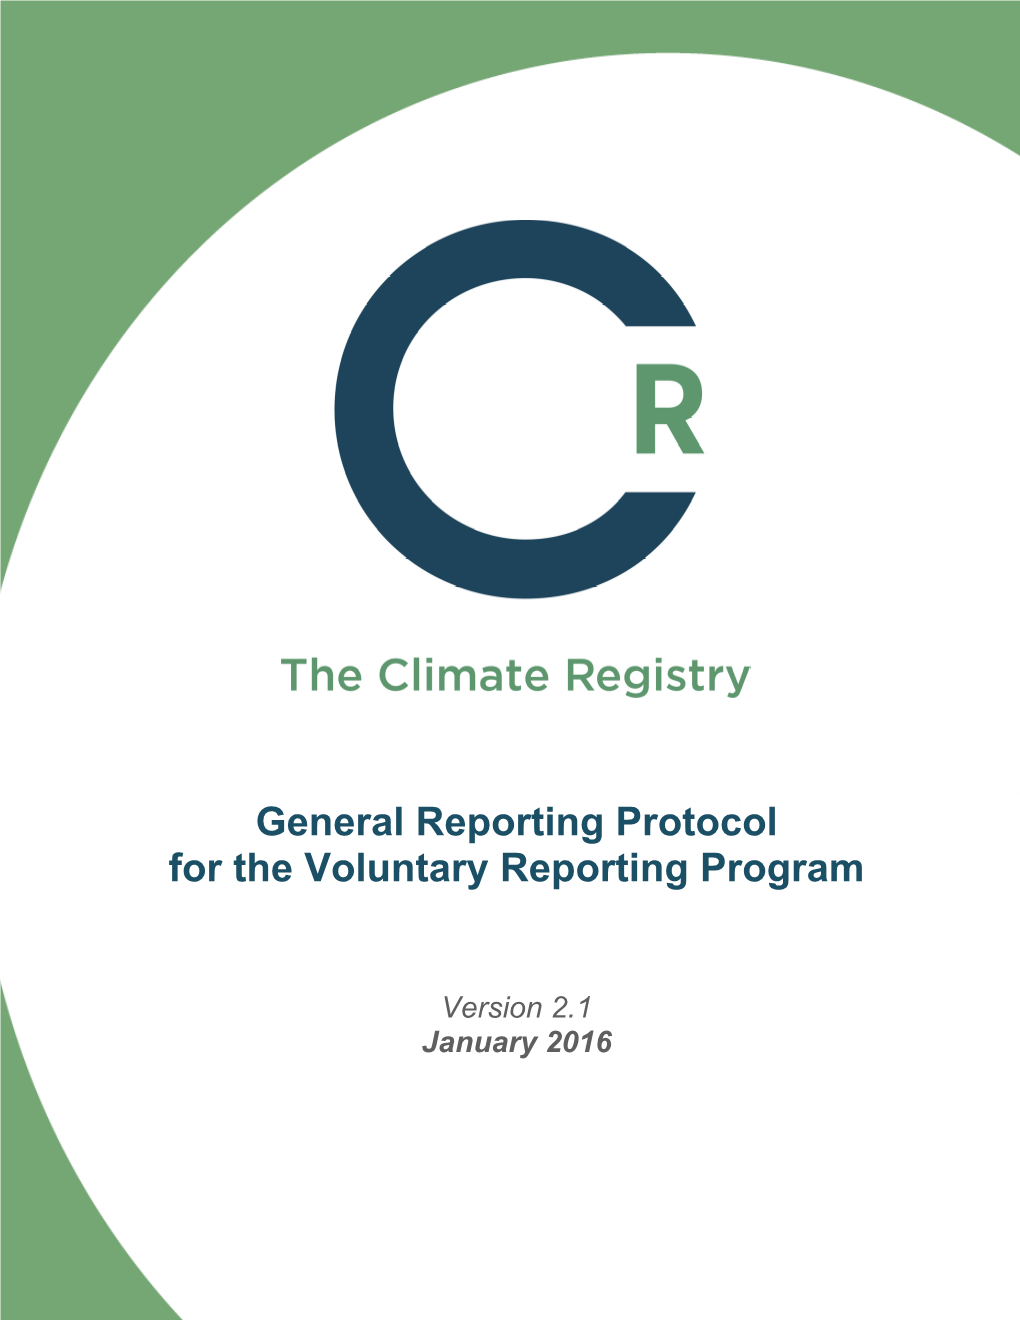 General Reporting Protocol for the Voluntary Reporting Program